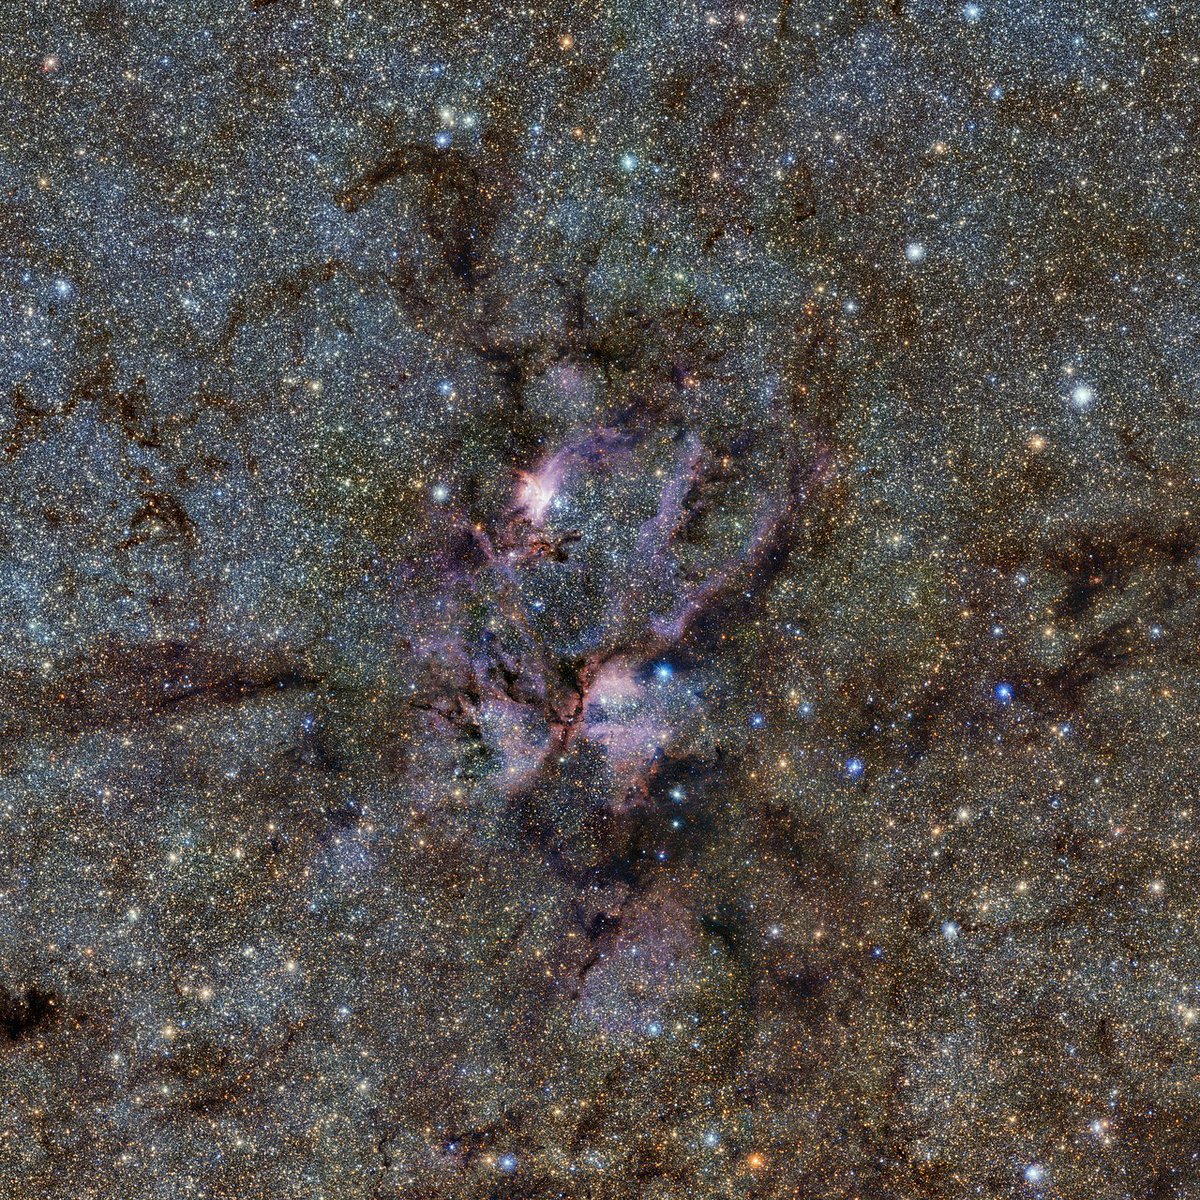 The Lobster Nebula

This image from ESO’s VISTA telescope captures a celestial landscape of vast, glowing clouds of gas and tendrils of dust surrounding hot young stars. This infrared view reveals the stellar nursery known as NGC 6357 in a new light.